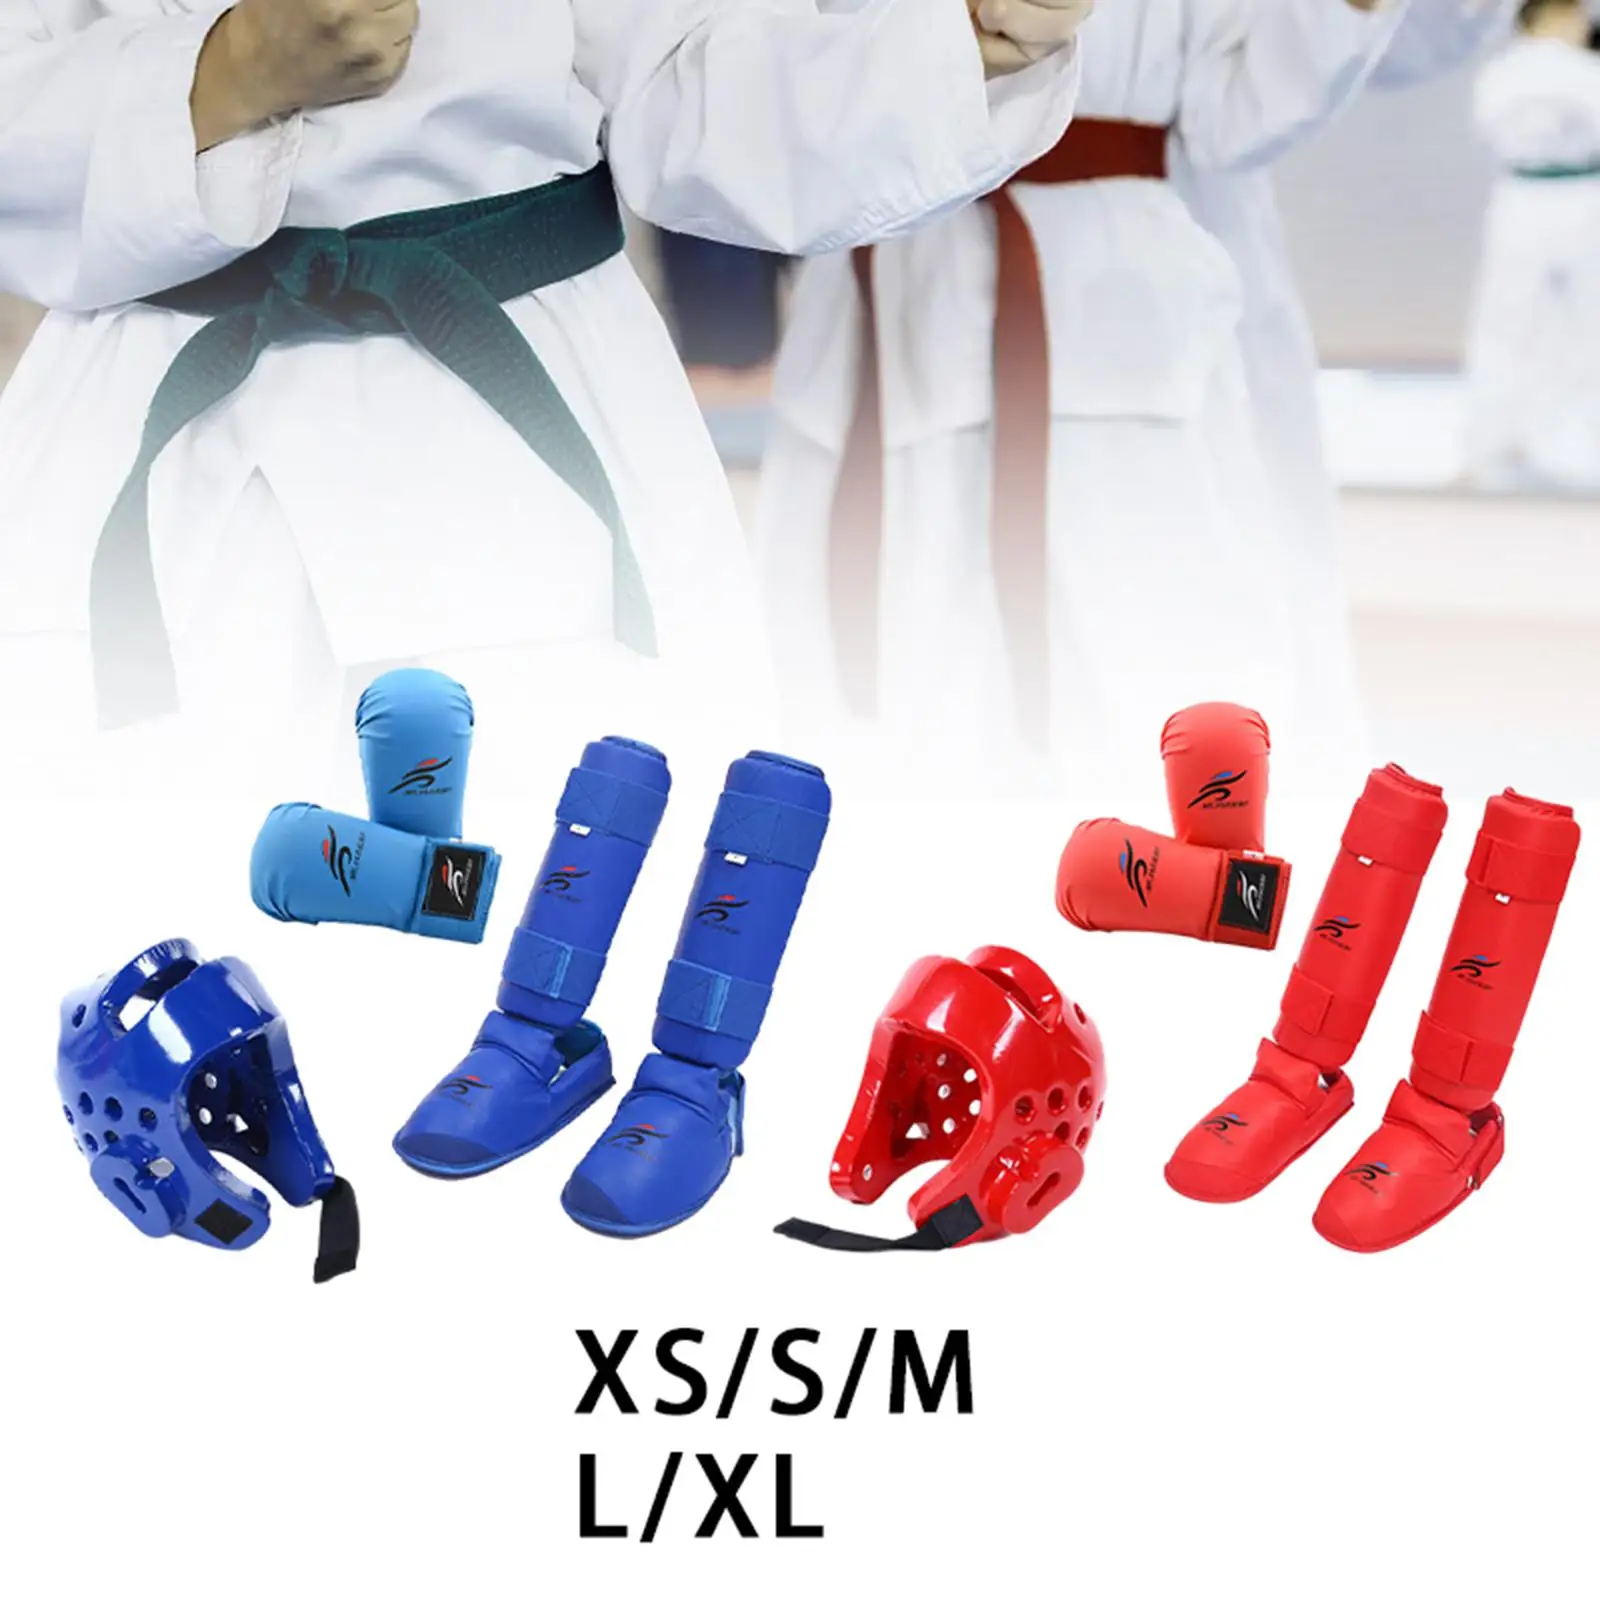 Karate Sparring Gear Set Training with Shin Guards for Kickboxing Sanda Mma